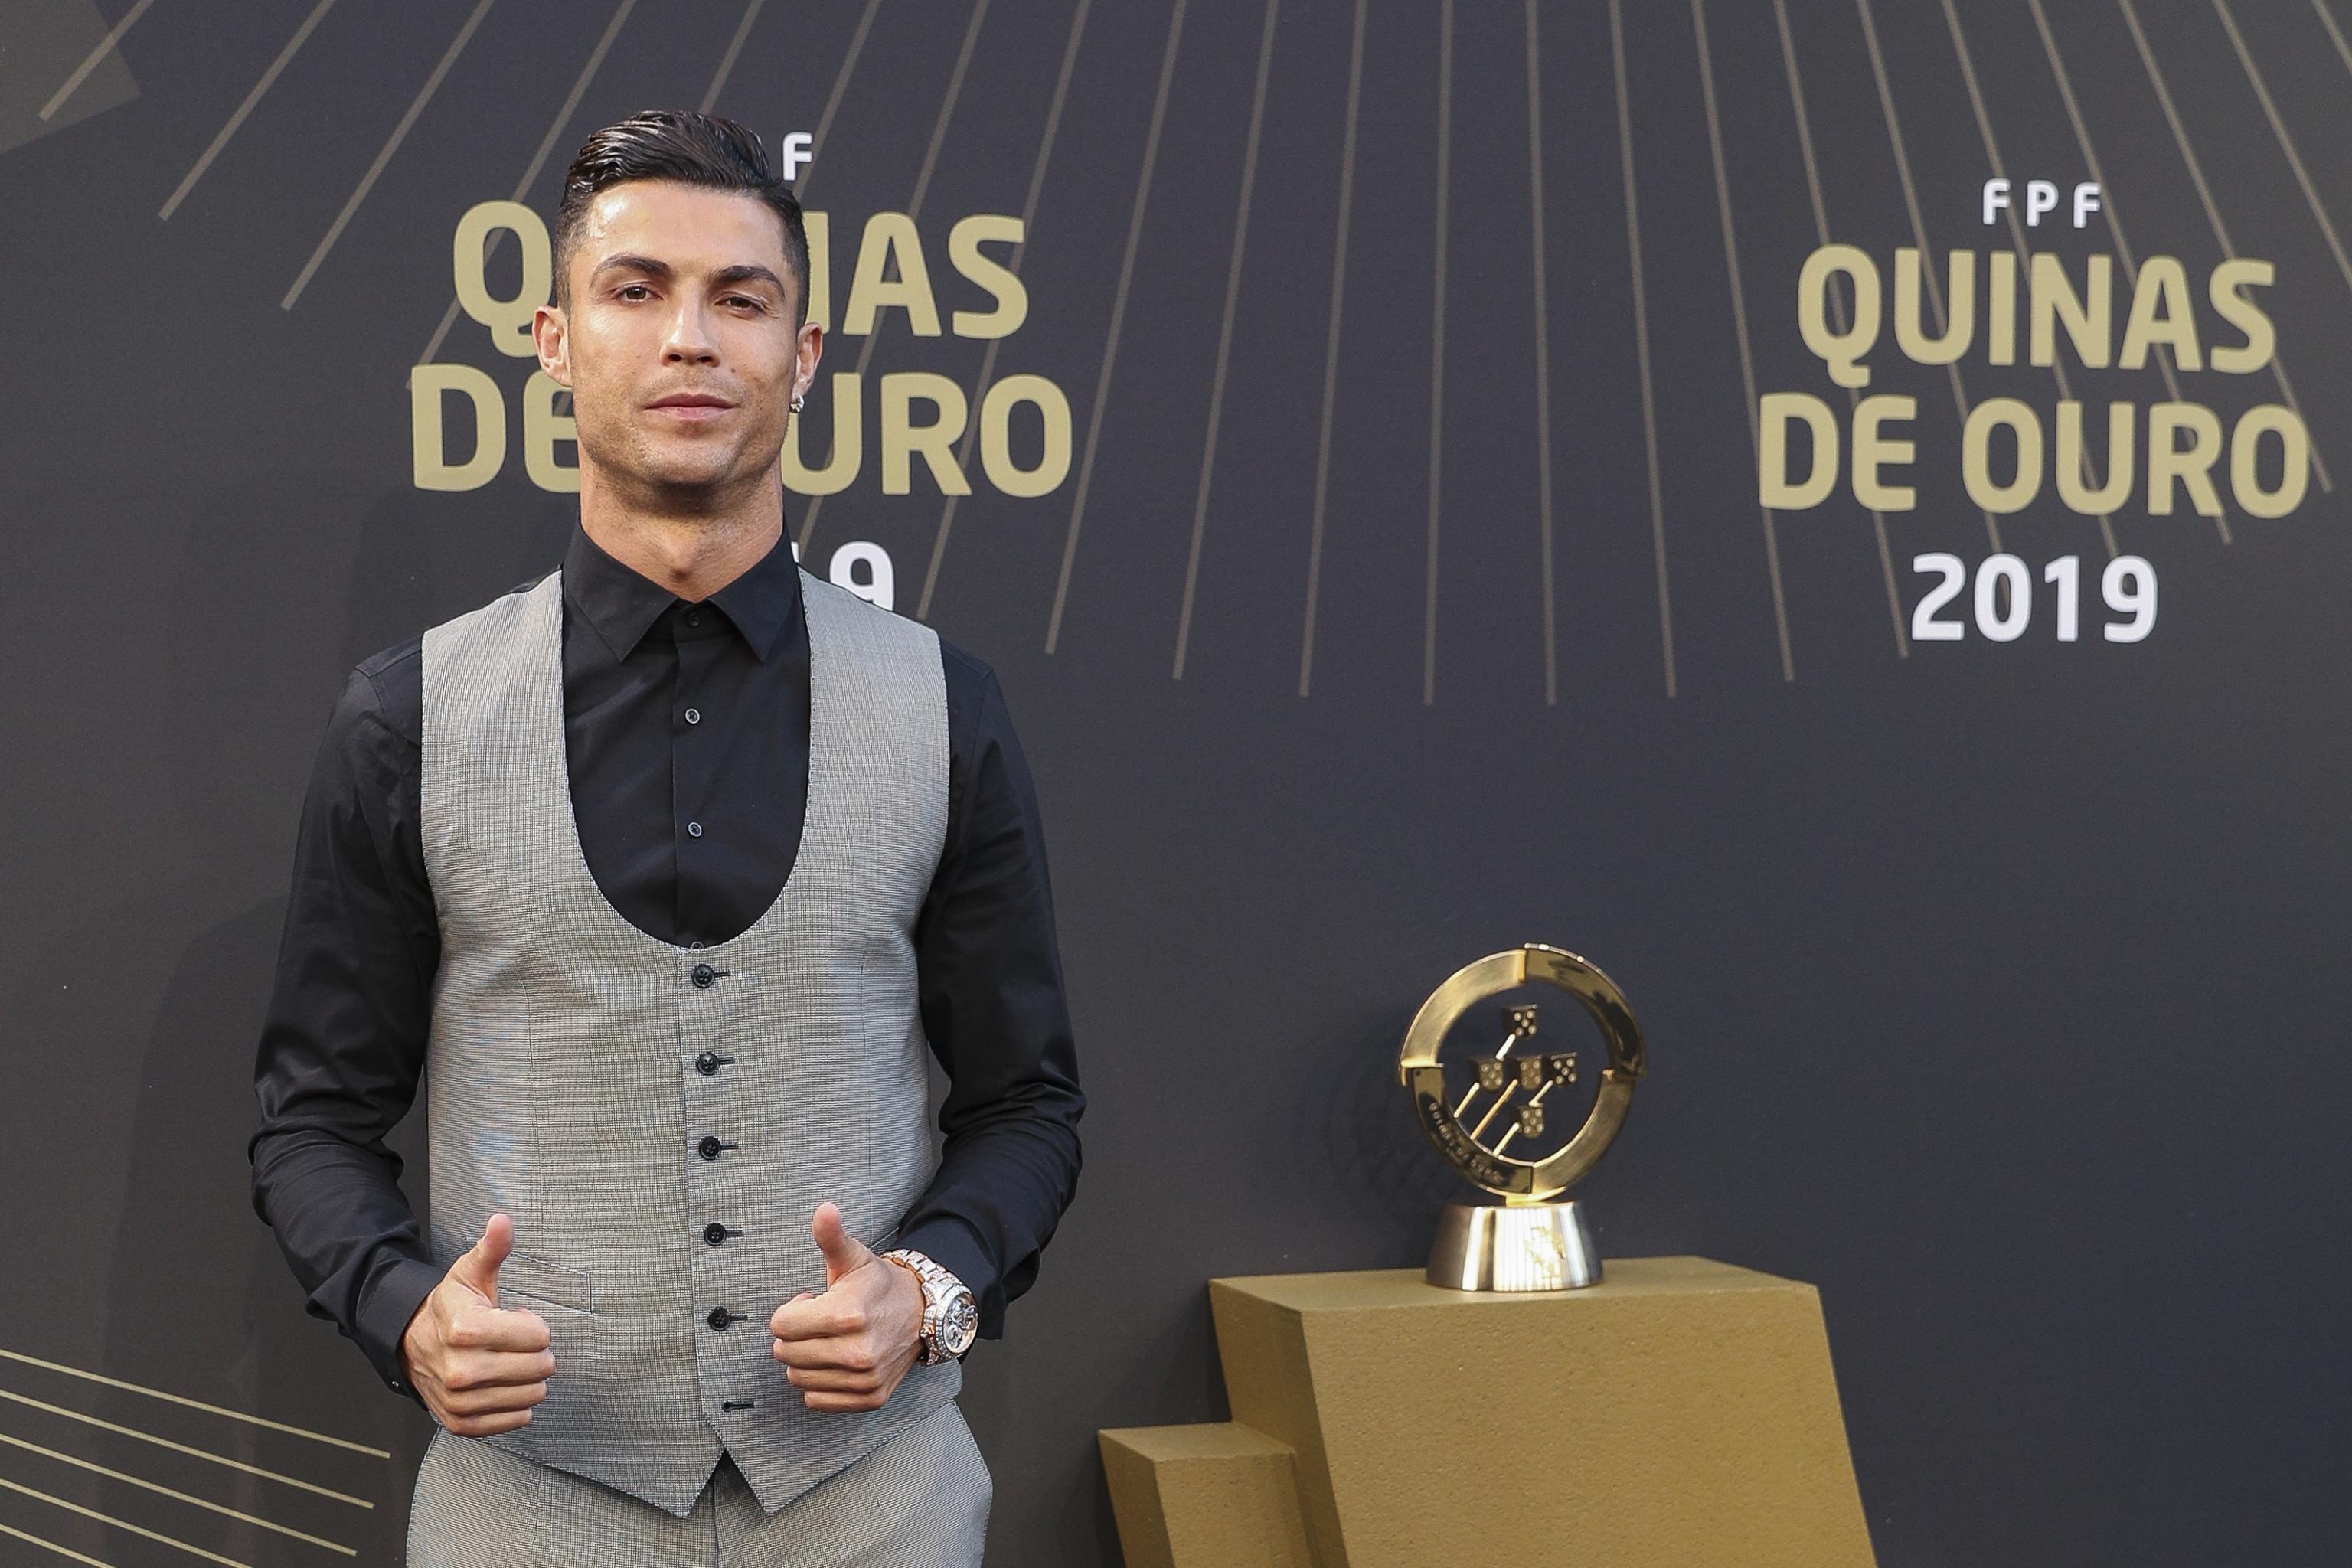 Ronaldo once again won the Portuguese player of the year award — FirstTouch